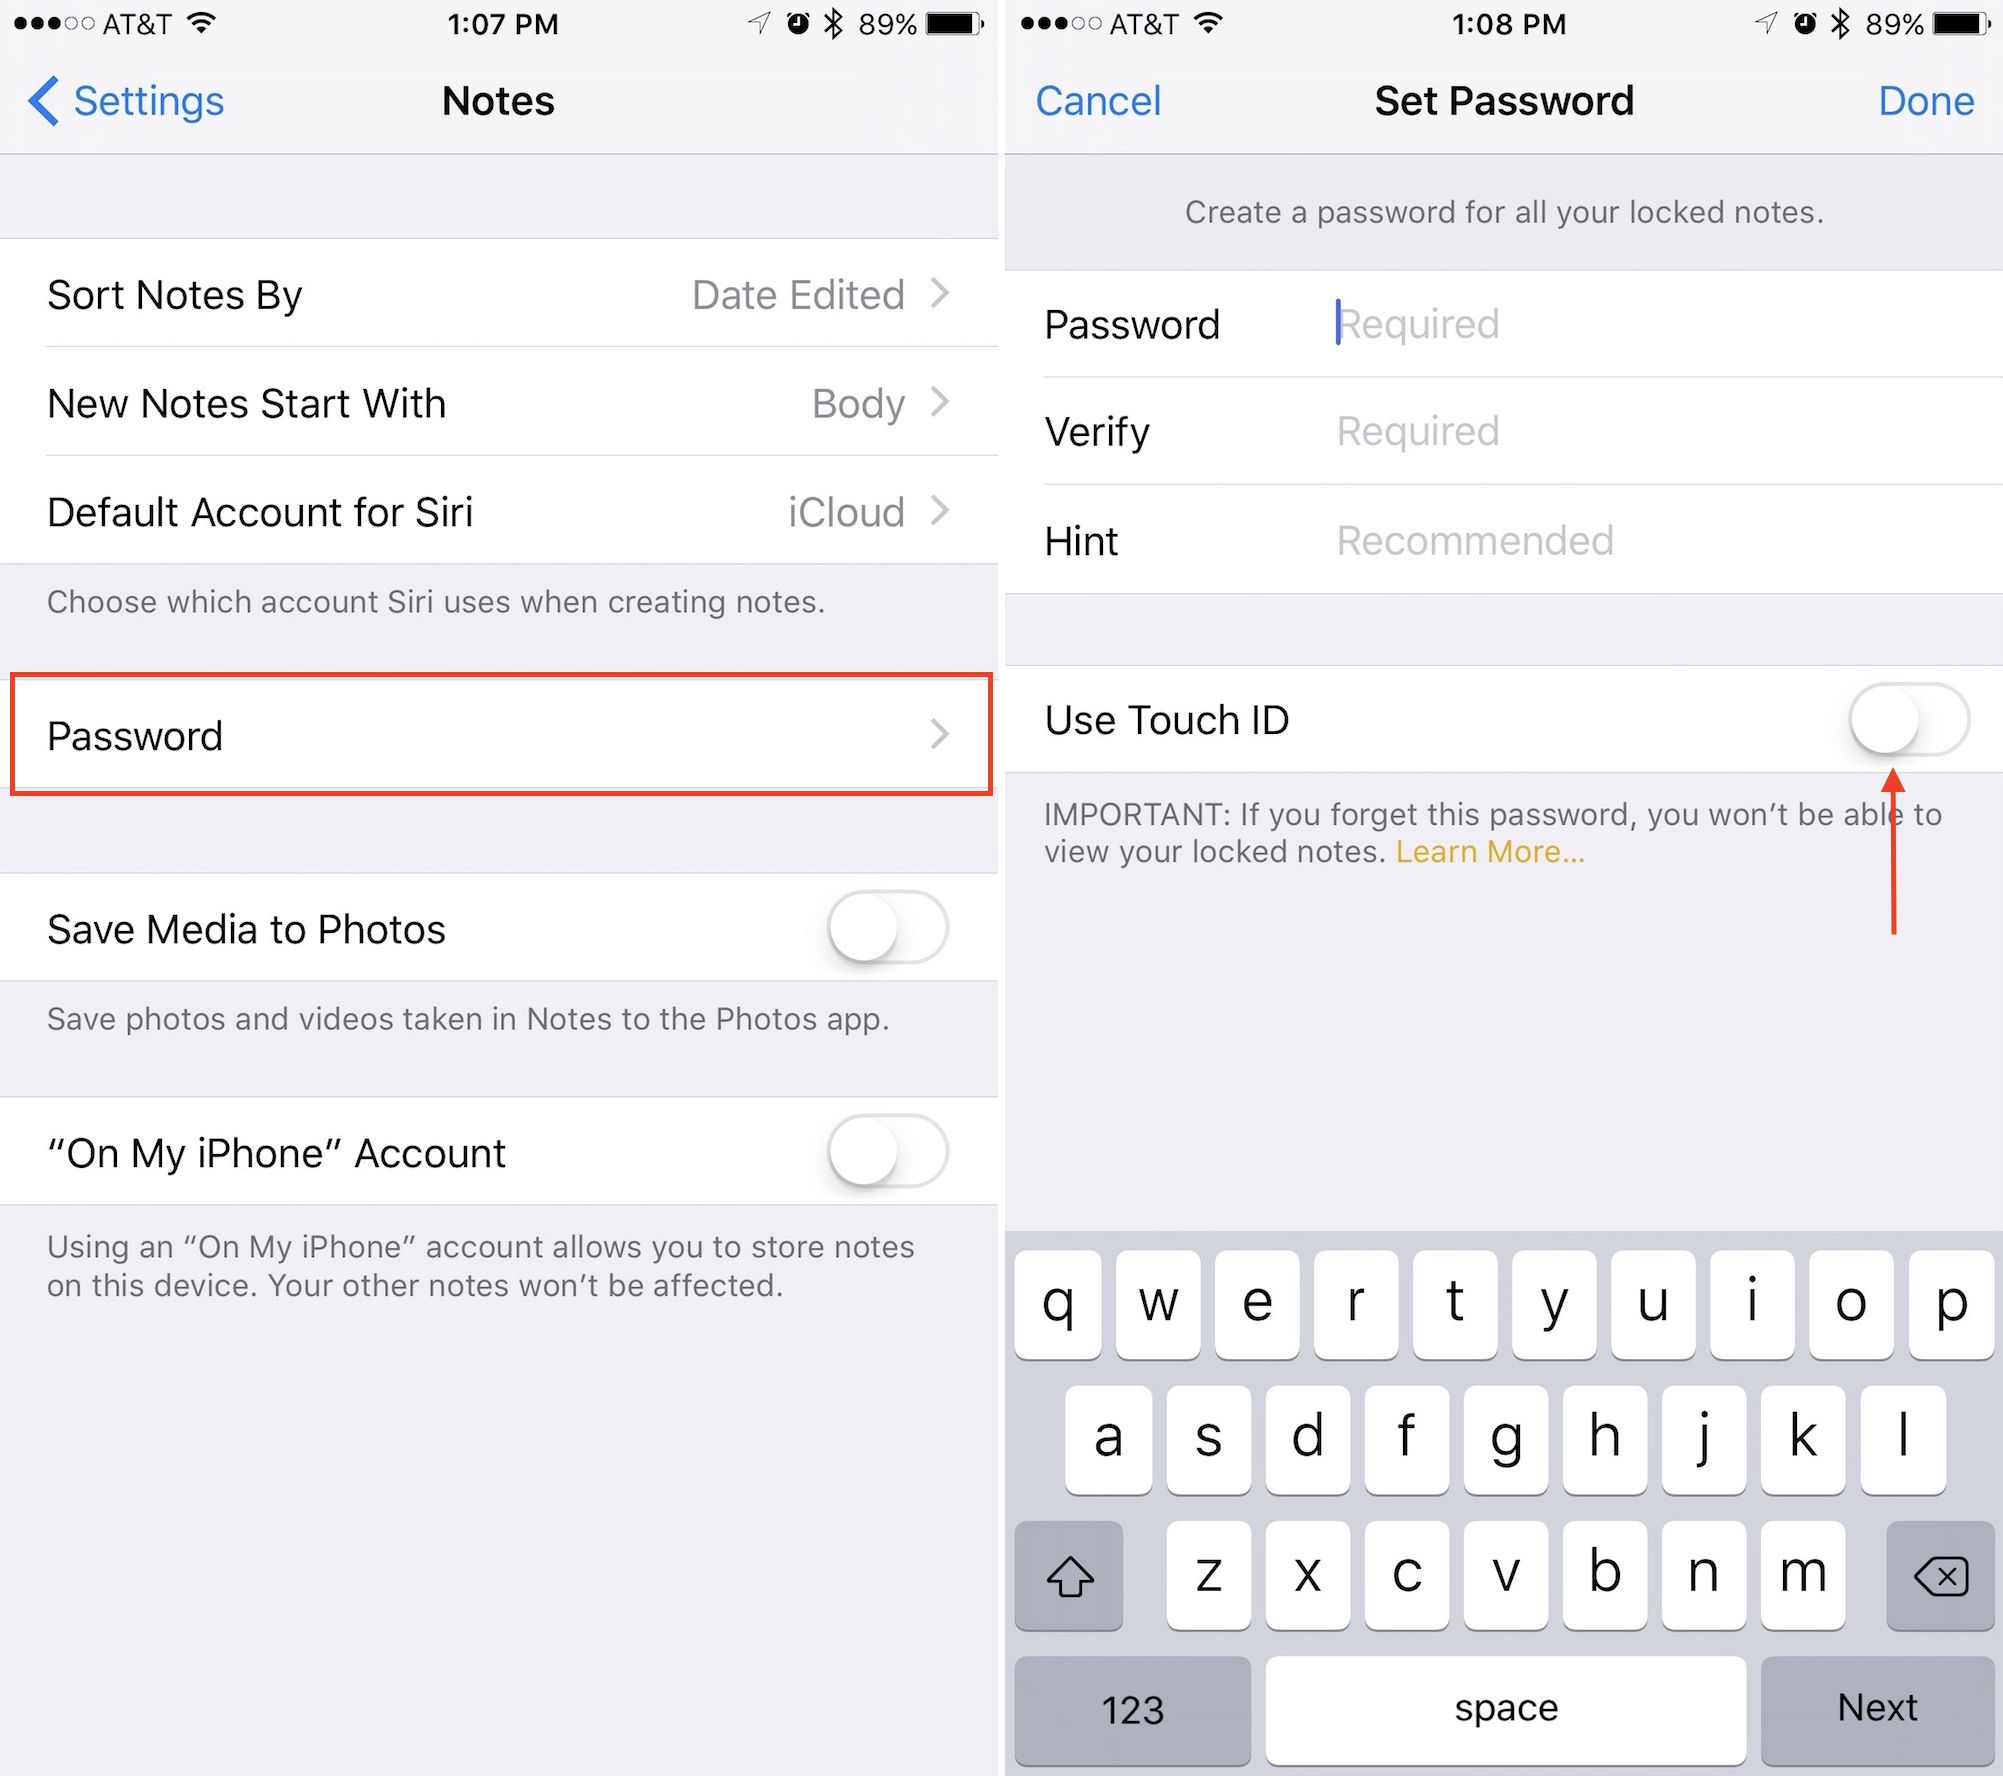 notes-password-change-modifying-password-for-notes-on-iphone-12